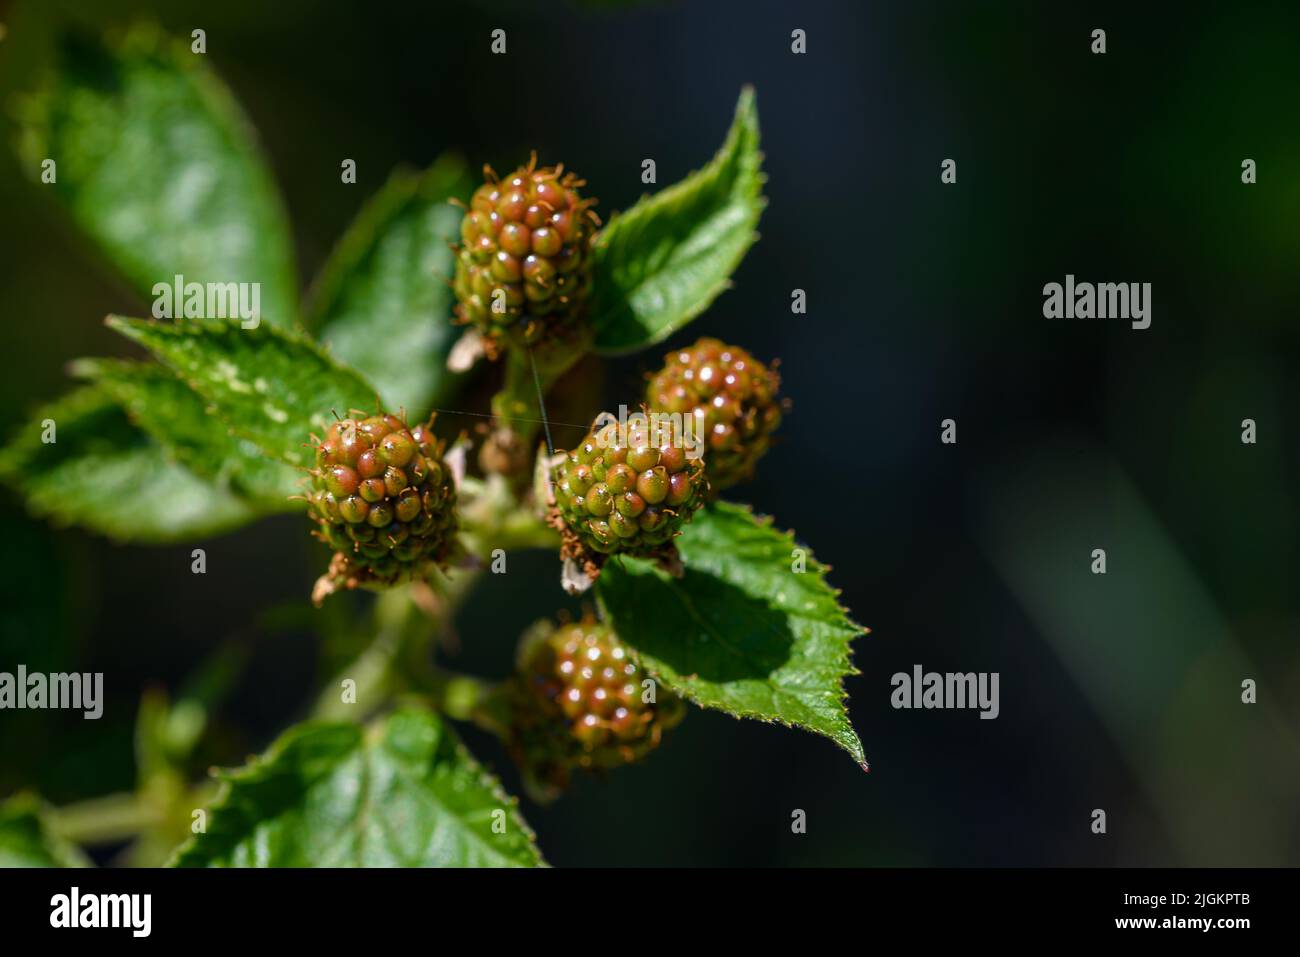 Close view of a blackberry plant with some still unripe fruits. Stock Photo